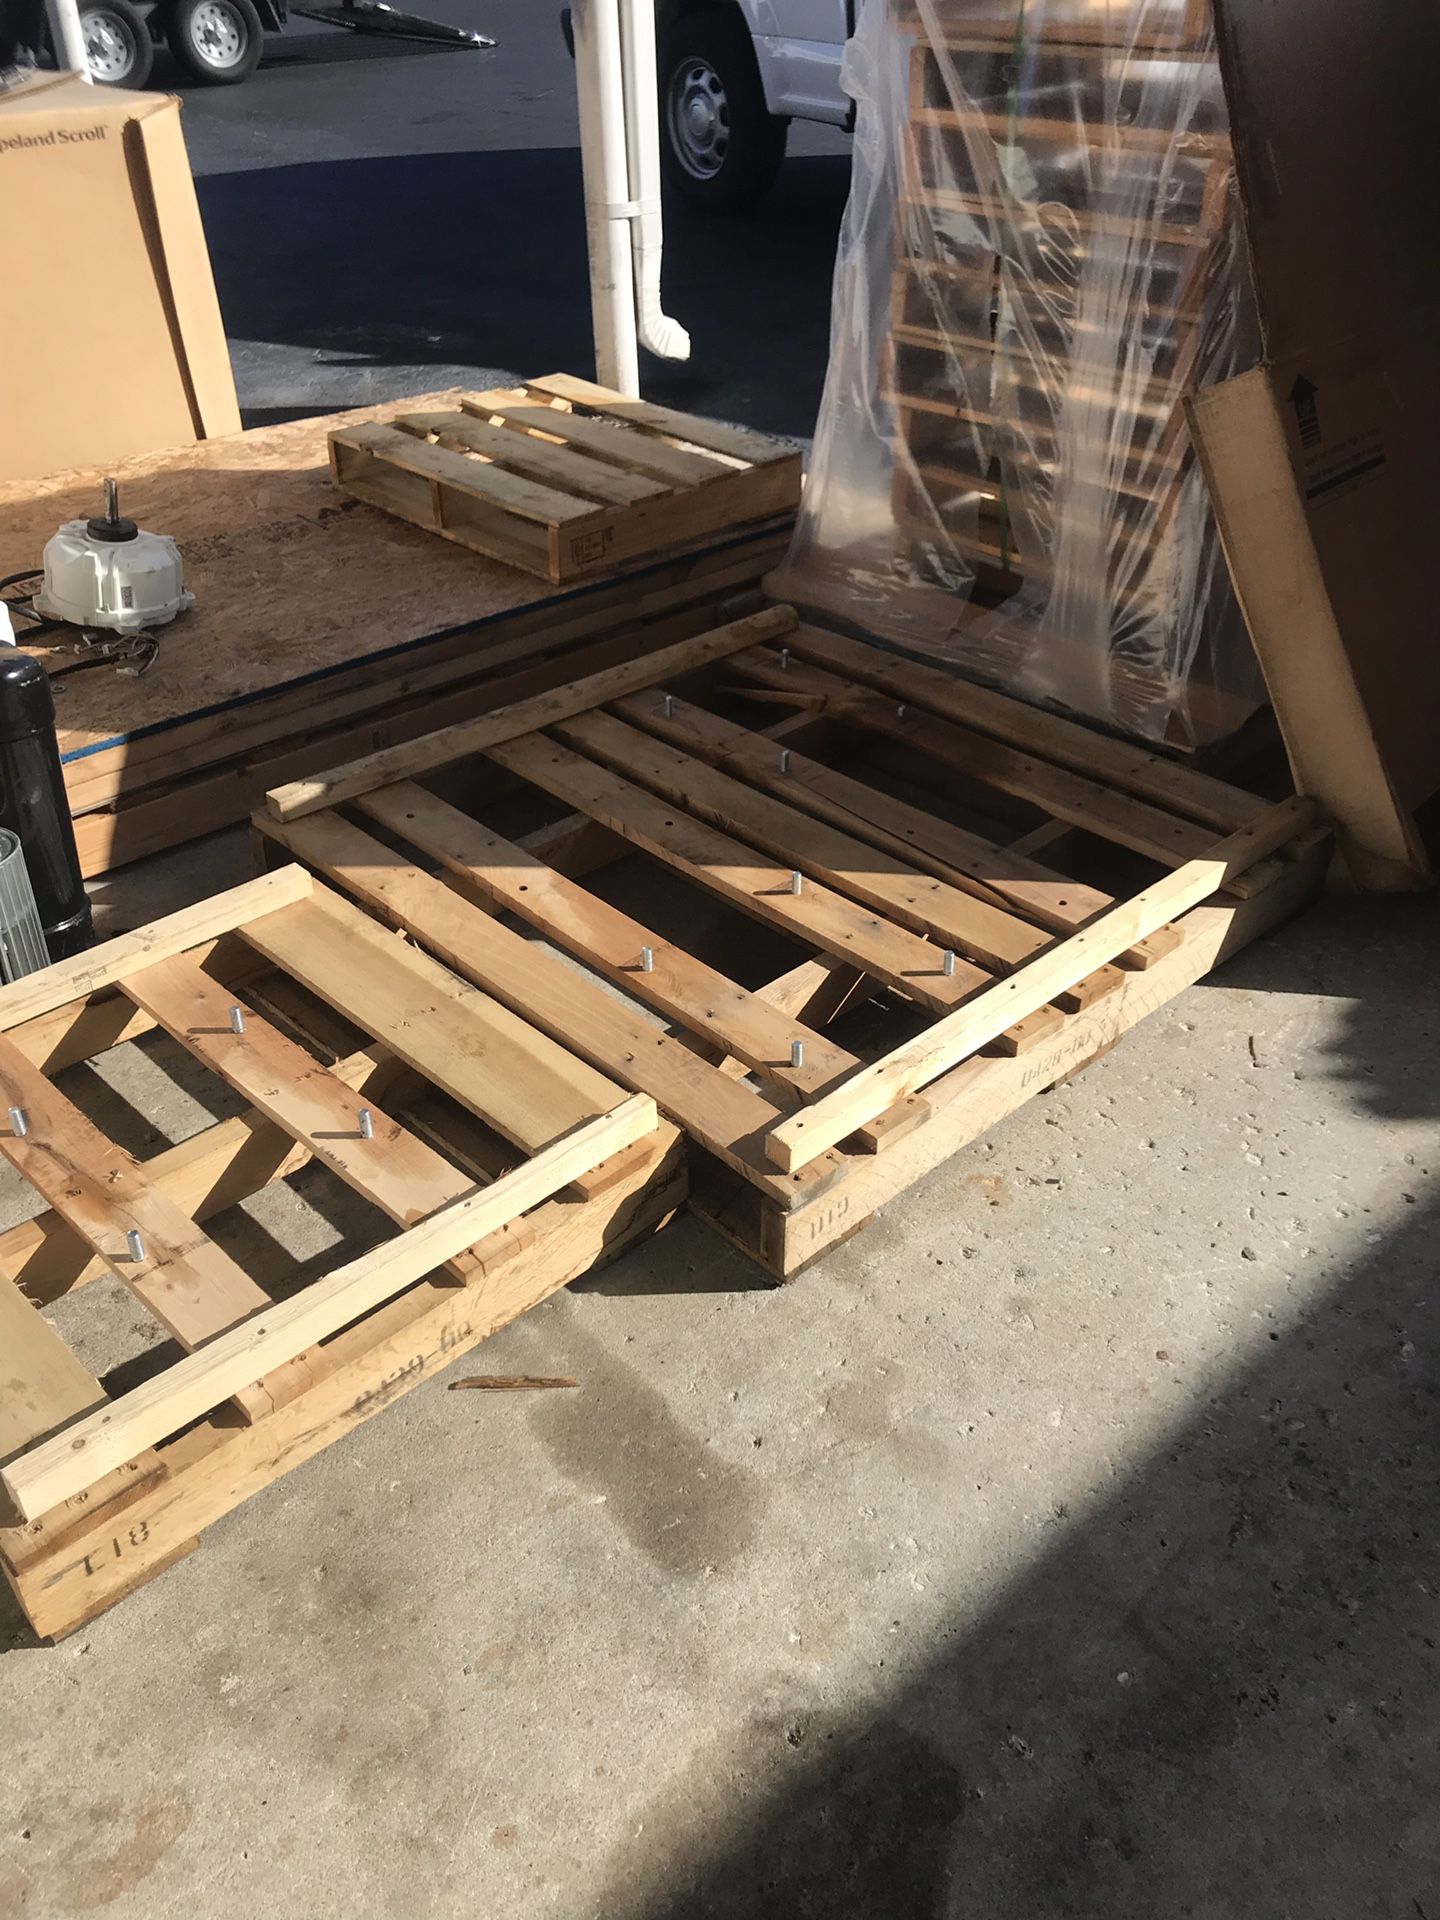 Free pallets just bring a truck or trailer I have a forklift I load, u go located by Raymond James stadium